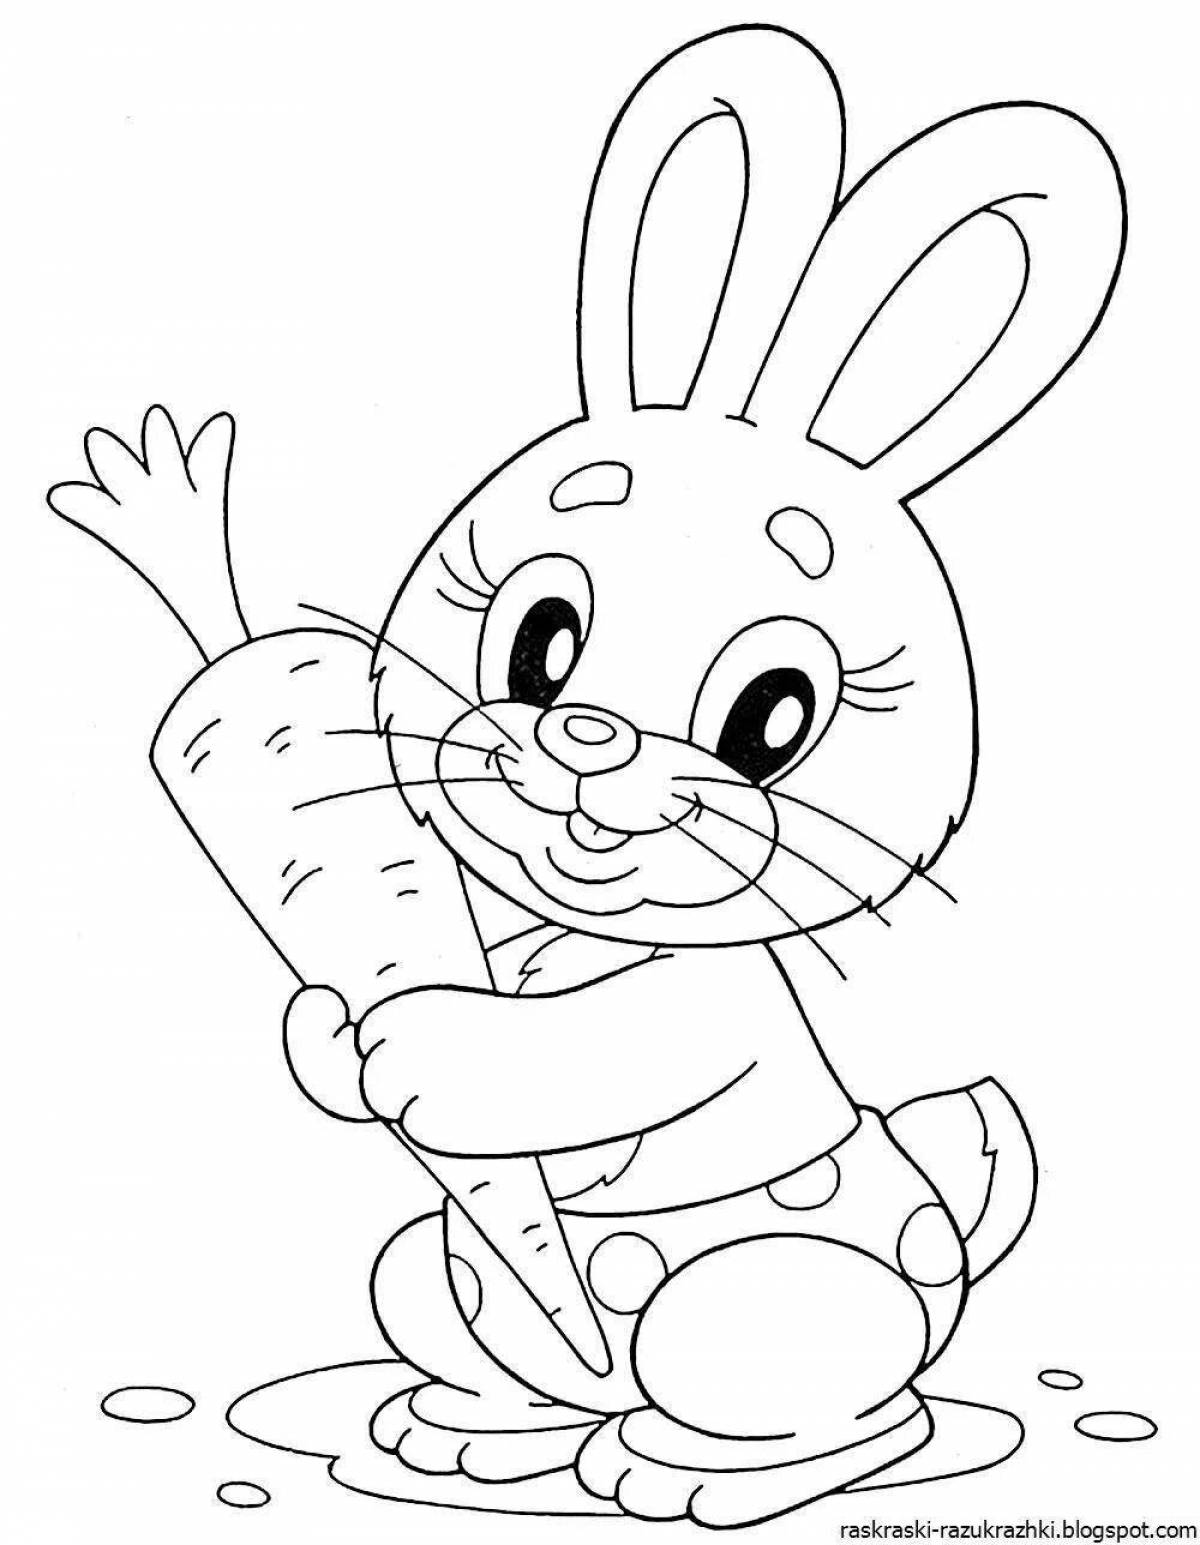 Playful rabbit coloring book for kids 3 4